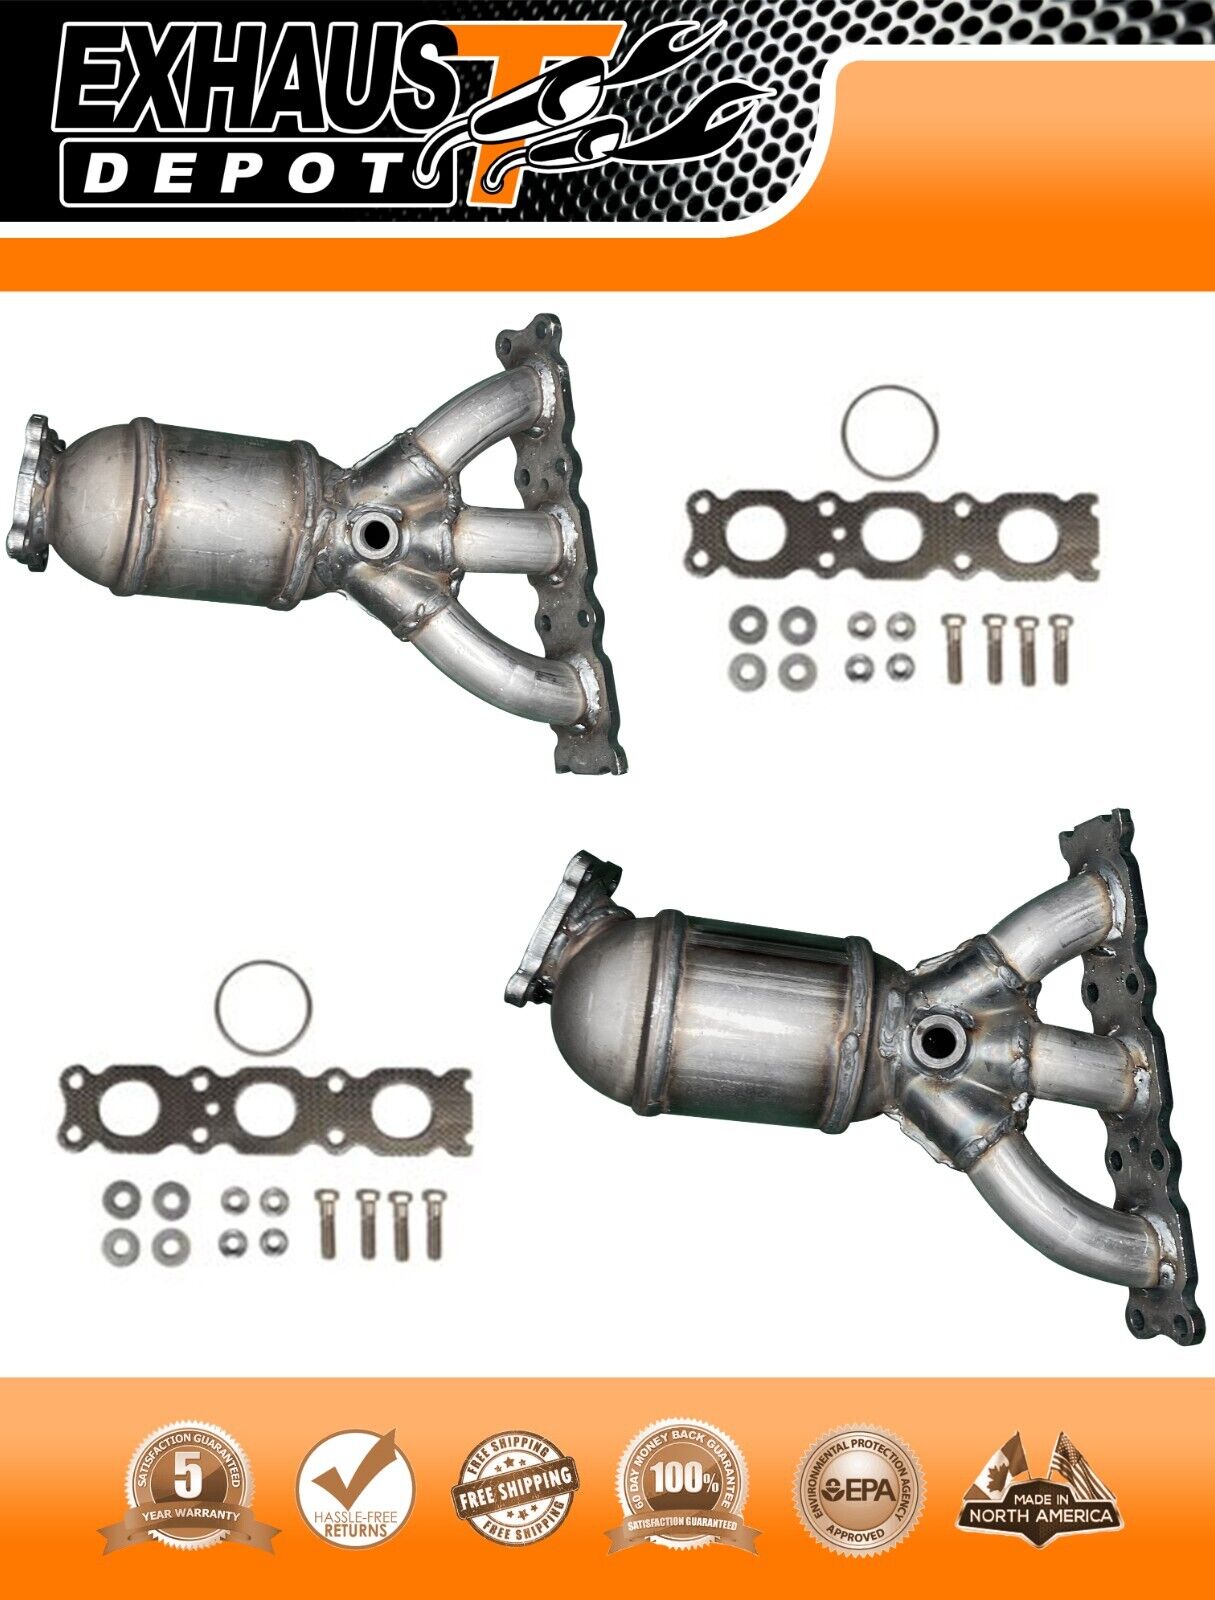 MANIFOLD CATALYTIC CONVERTER SET FOR 2007-2014 VOLVO XC90 3.2L LEFT + RIGHT SIDE